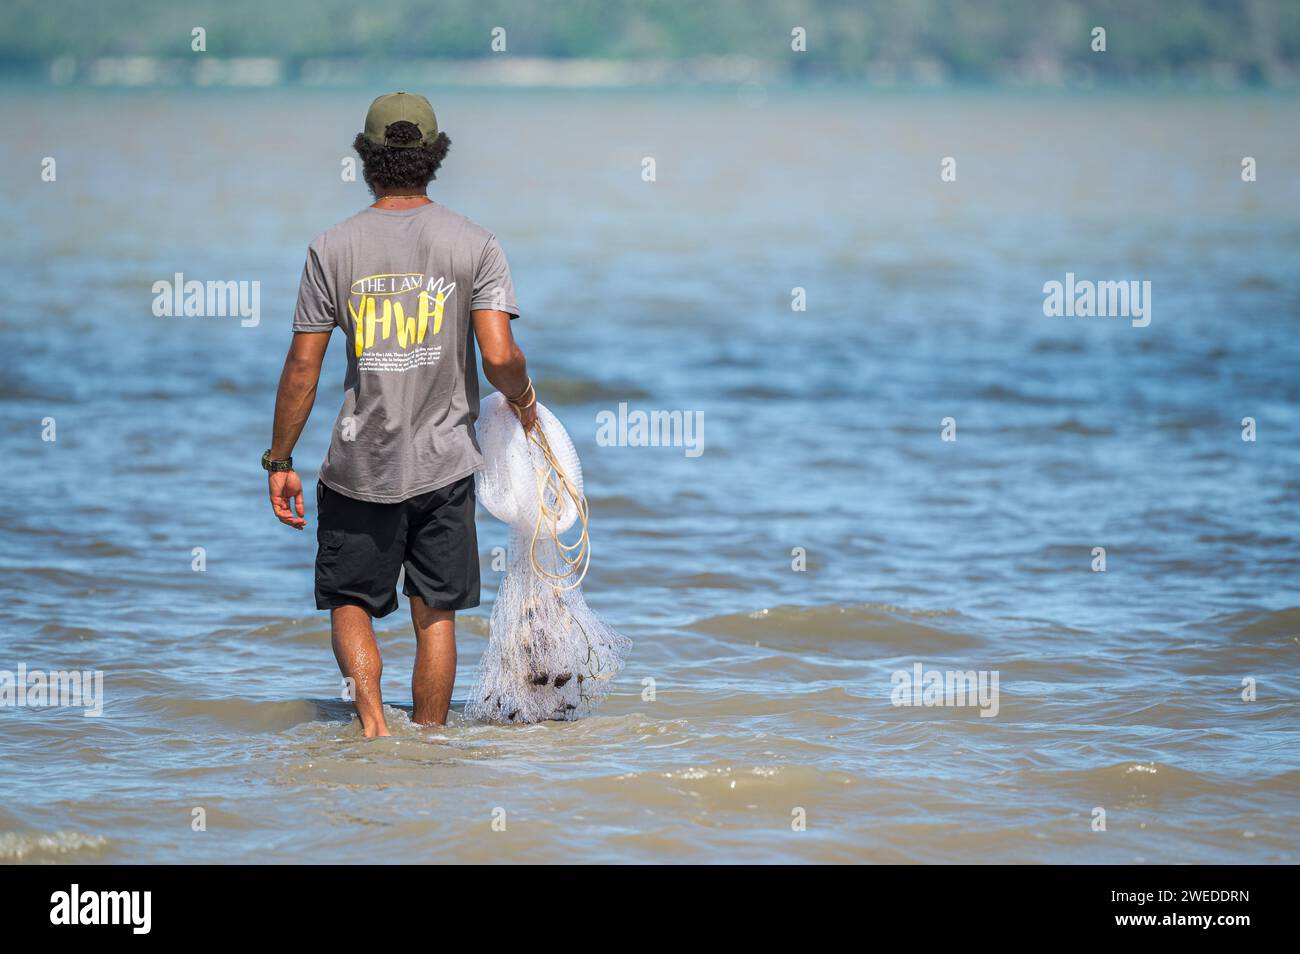 A good, young man stands knee deep in the sea with cast net in hand searching for food for his body and baring his deep 'faith' and conviction. Stock Photo